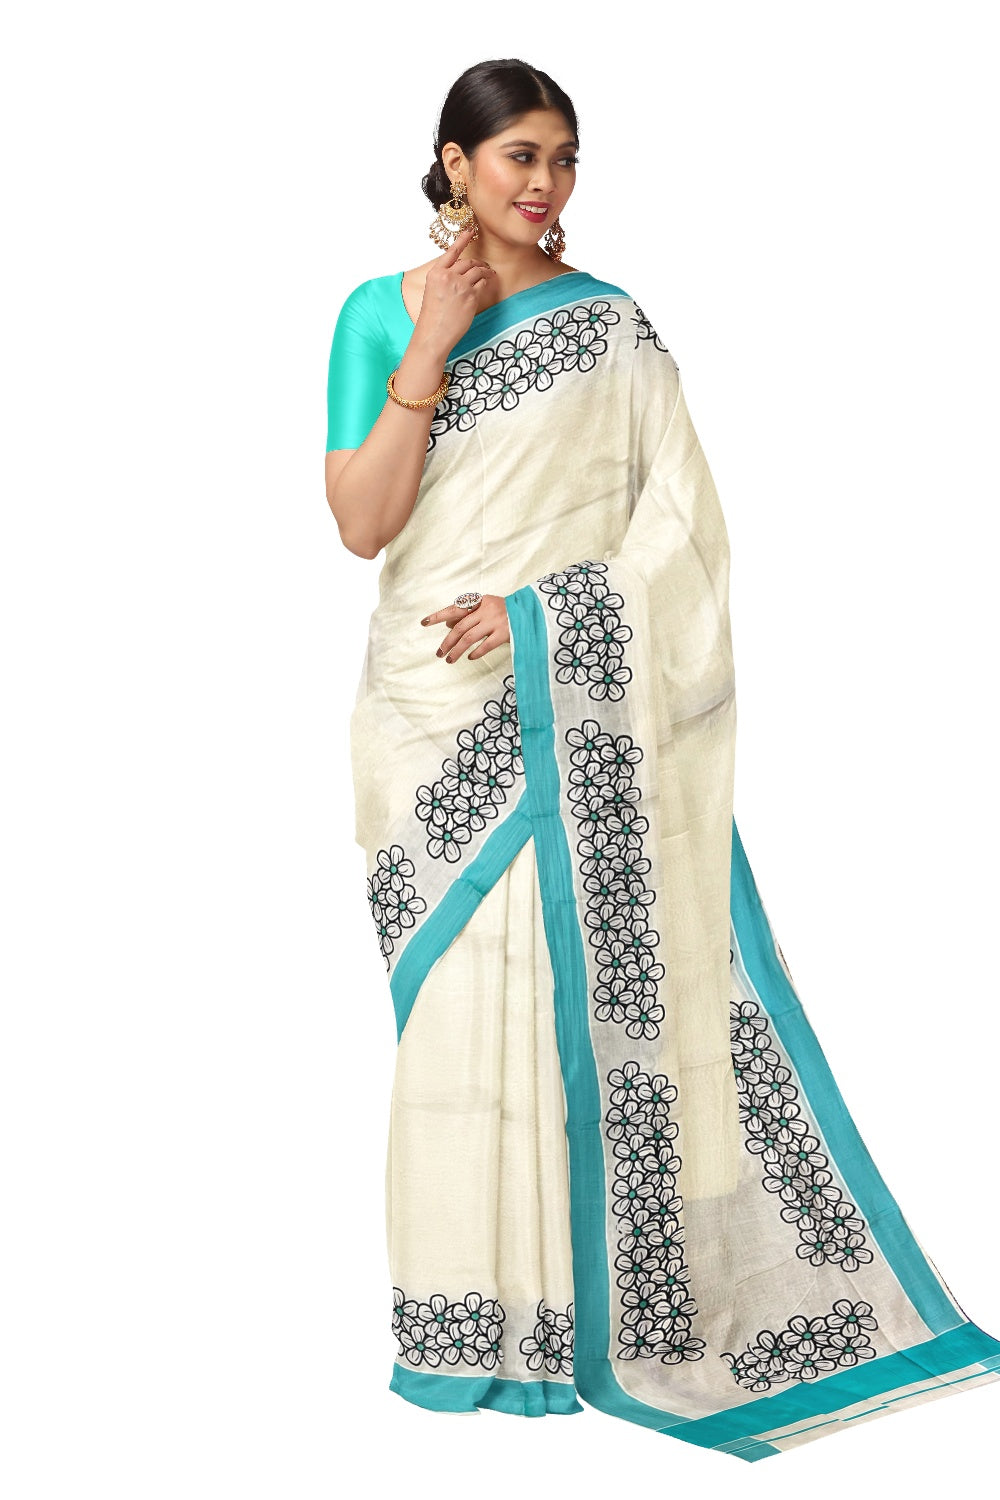 Southloom Onam 2022 Kerala Saree with Black Floral Block Prints and Turquoise Border